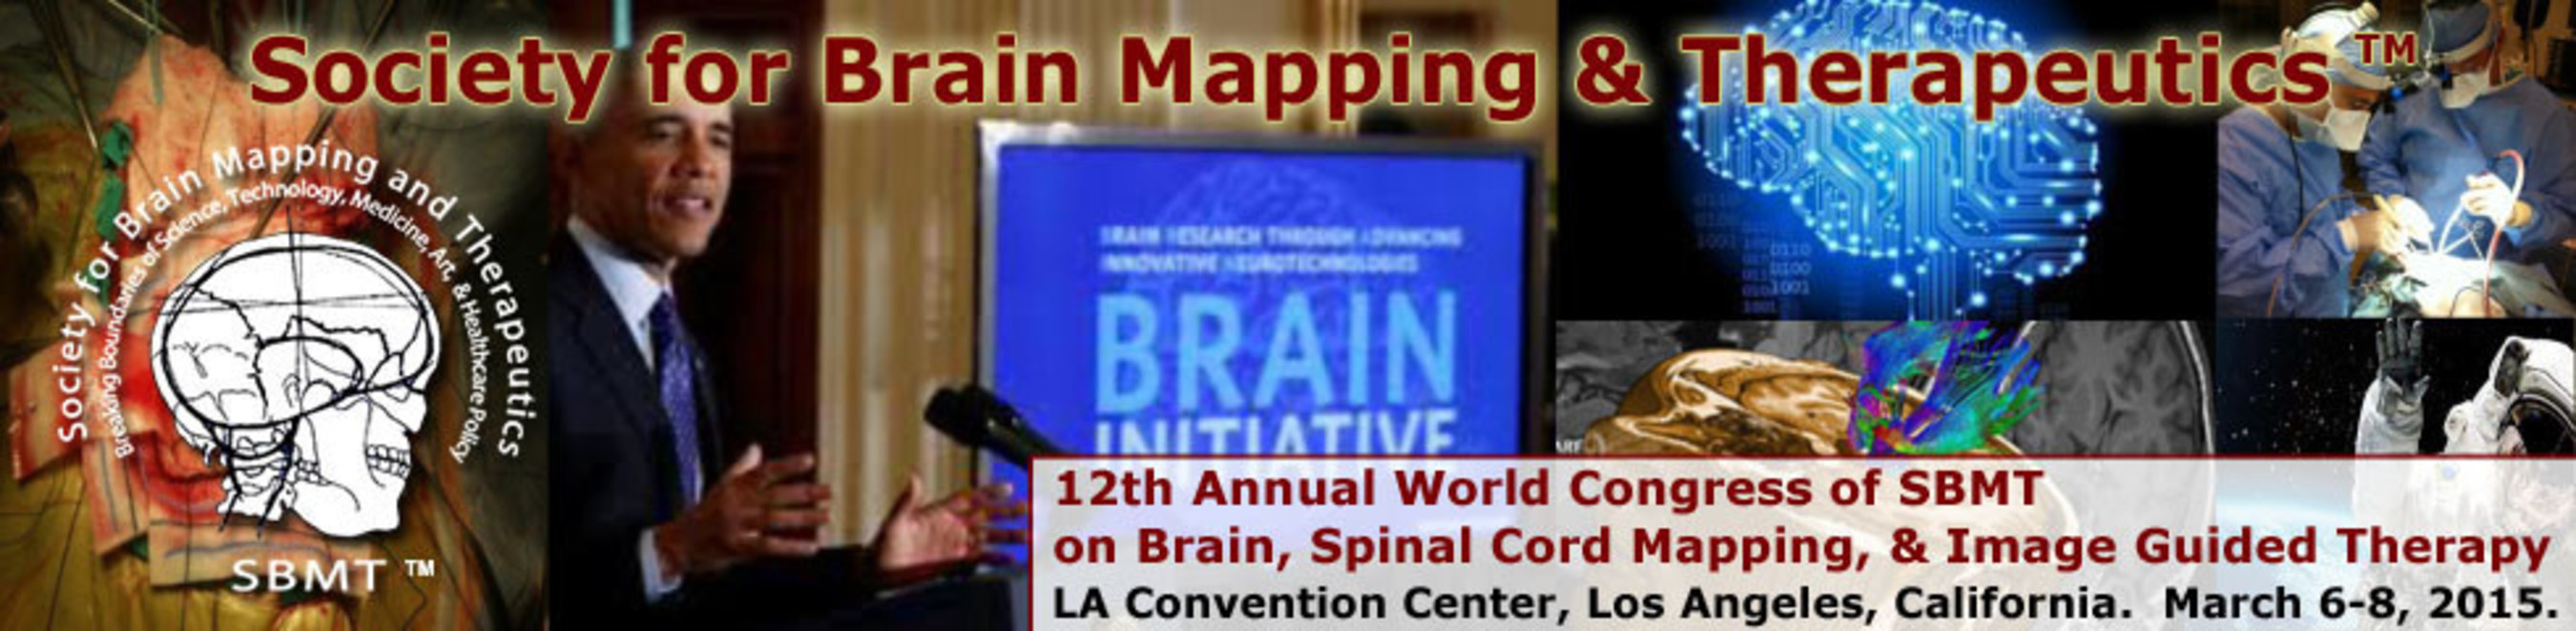 Society for Brain Mapping and Therapeutics holds its 12th Annual World Congress at the LA Convention Center in March announcing its African Brain Mapping Initiative.